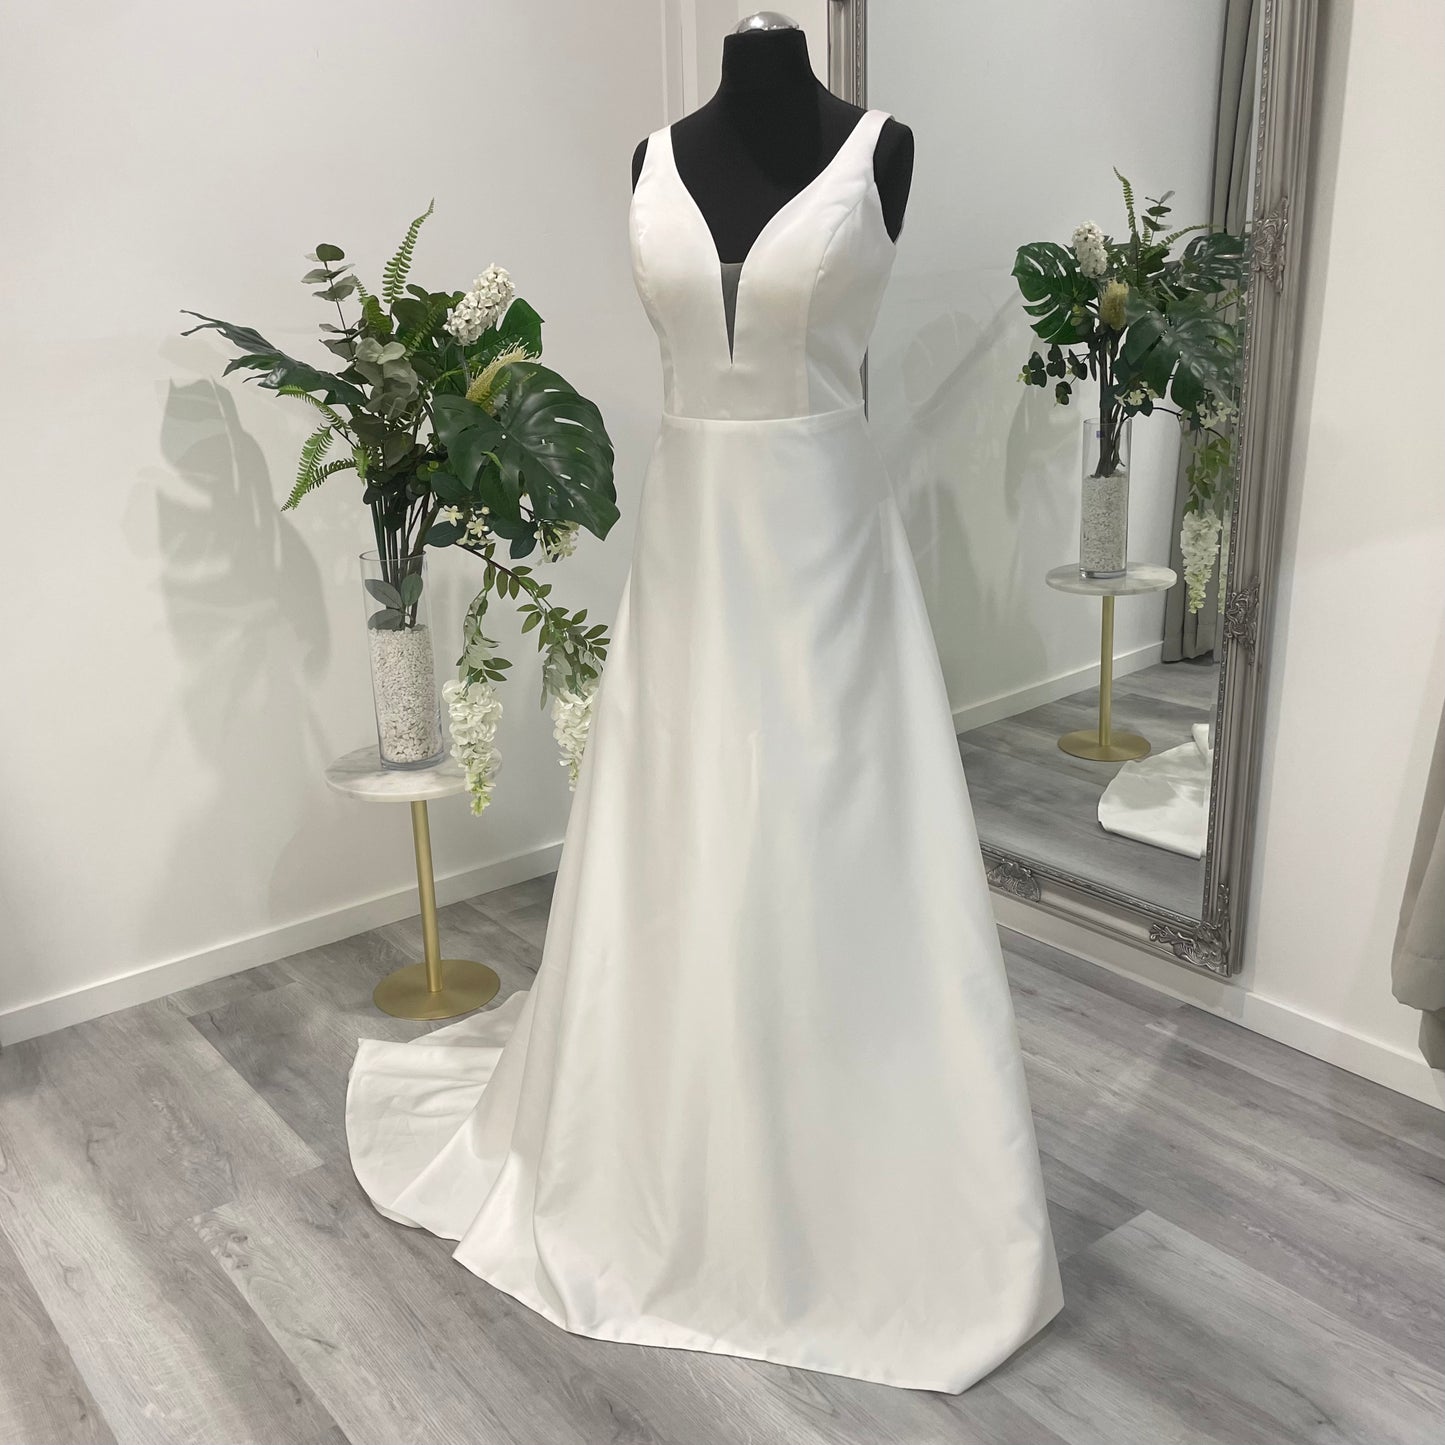 Sophisticated Daisy Wedding Gown with a deep V-neckline, displayed in Divine Bridal salon.